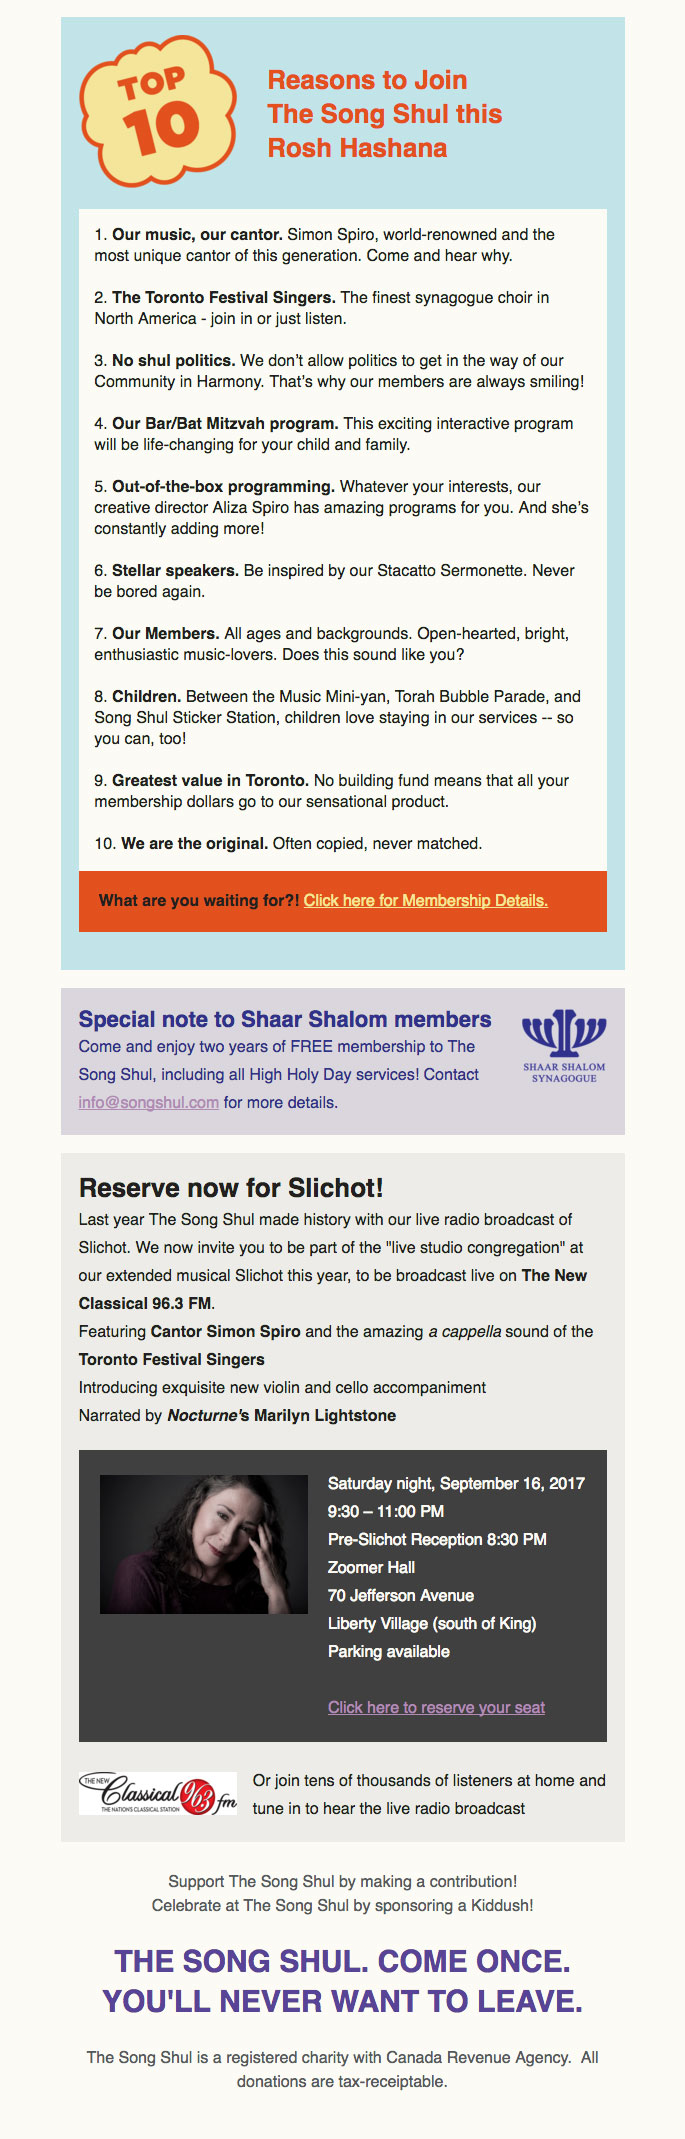 Ariel Cotton visual web identity logo design front-end web development the song shul email newsletter